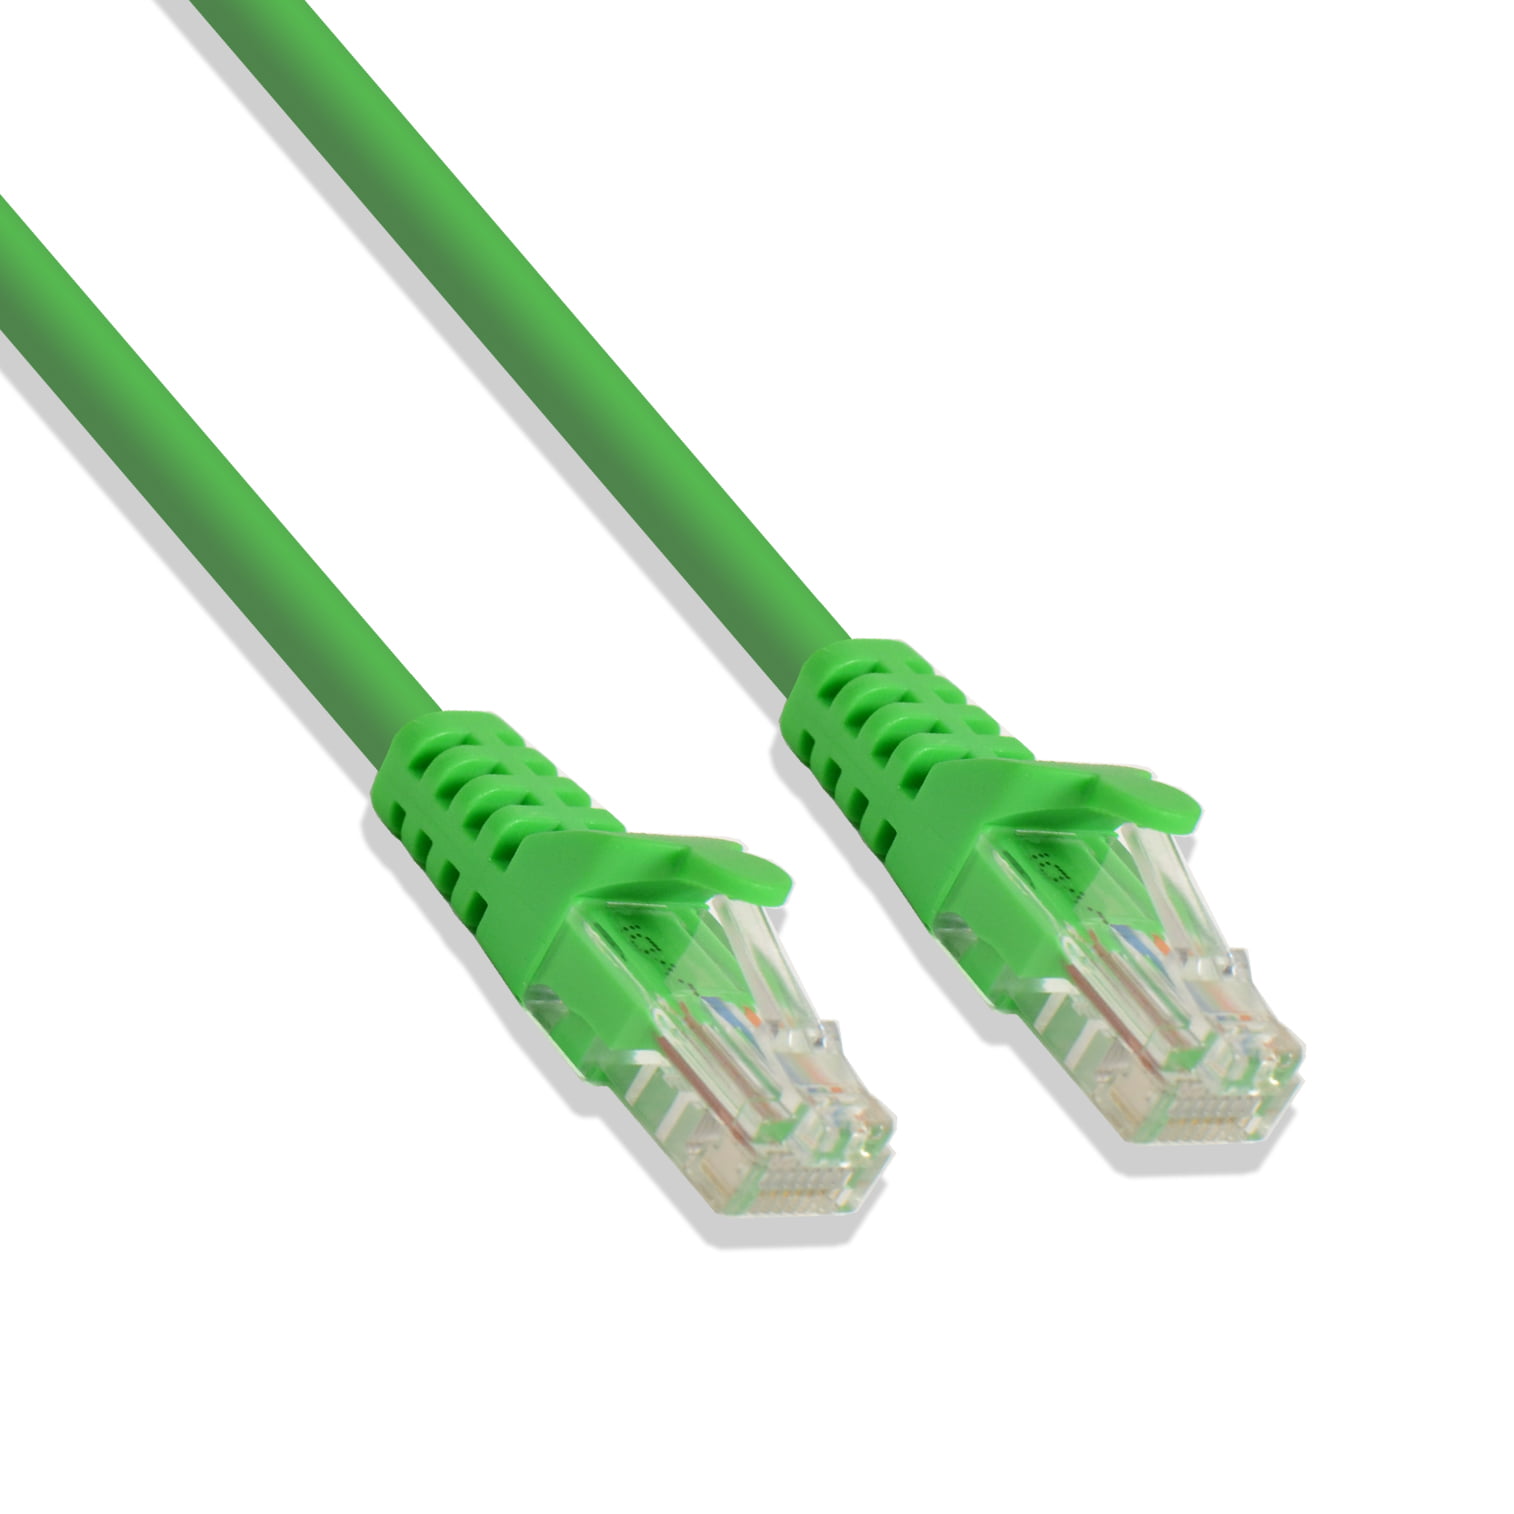 Green 1FT Cat6 Ethernet Network Cable LAN Internet Patch Cord RJ45 Gigabit Ultra Spec Cables Pack of 4 